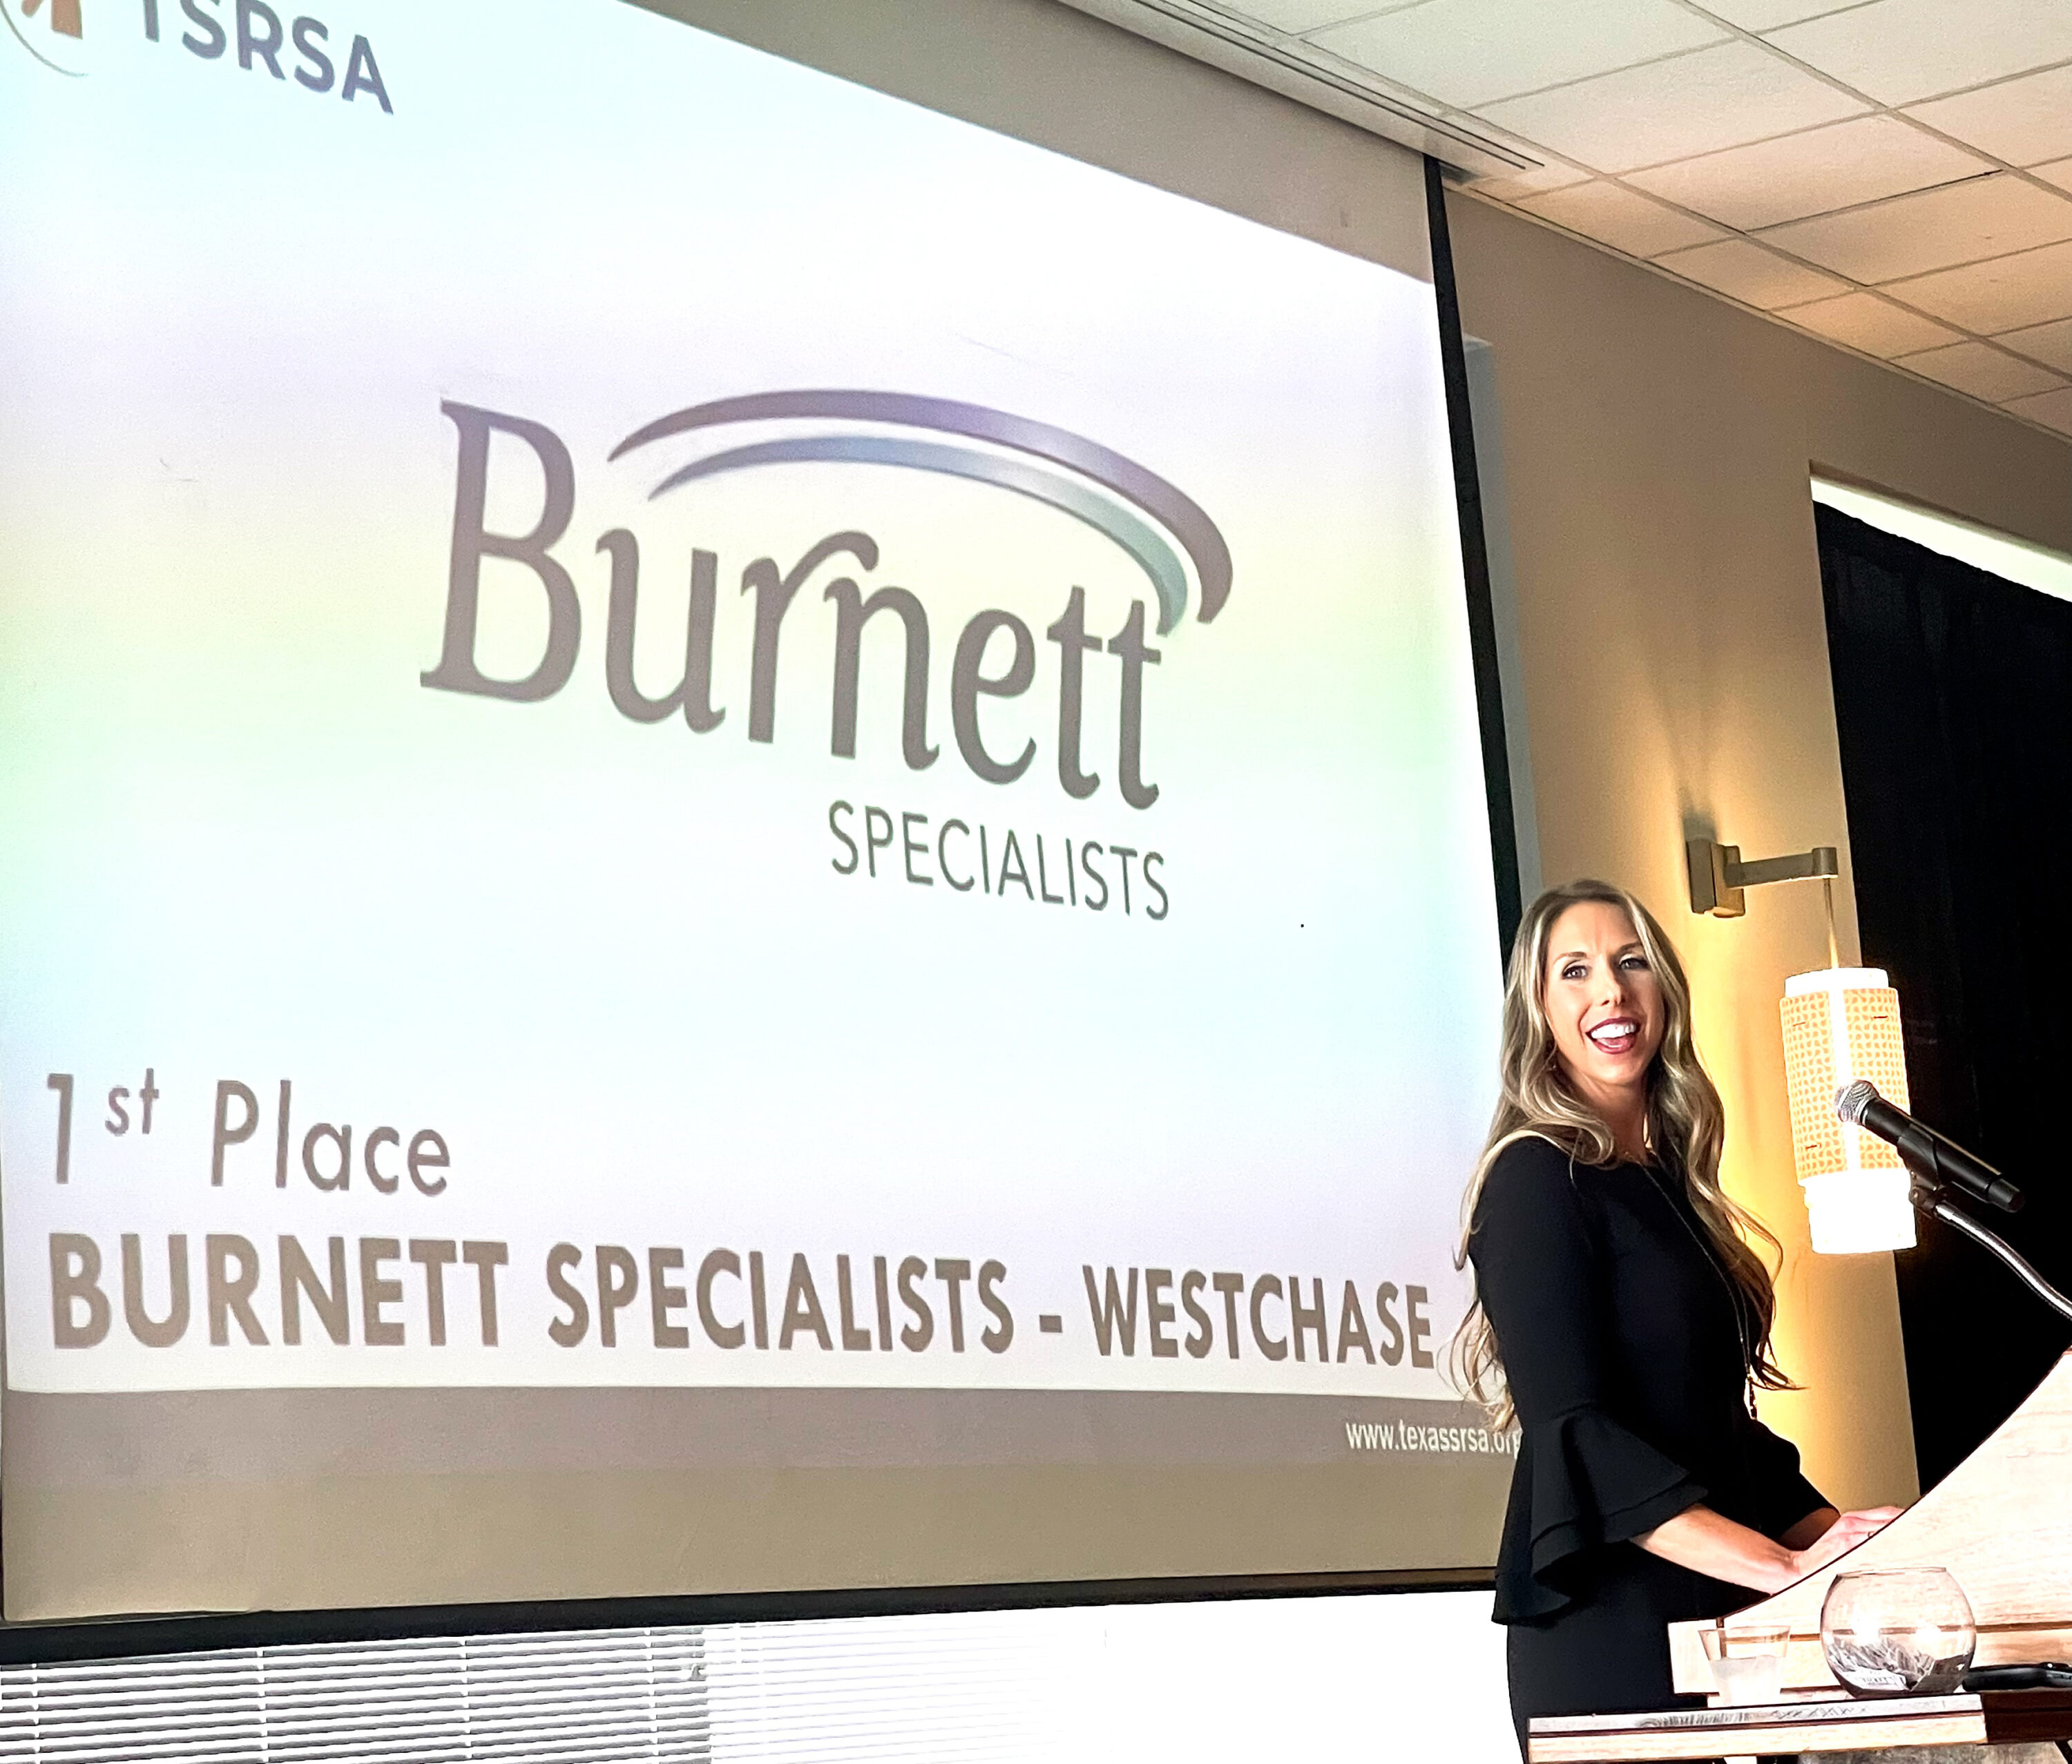 Burnett Specialists is the Most Award Winning Staffing Firm Again at the 40th Annual TSRSA Conference and Awards Banquet 4